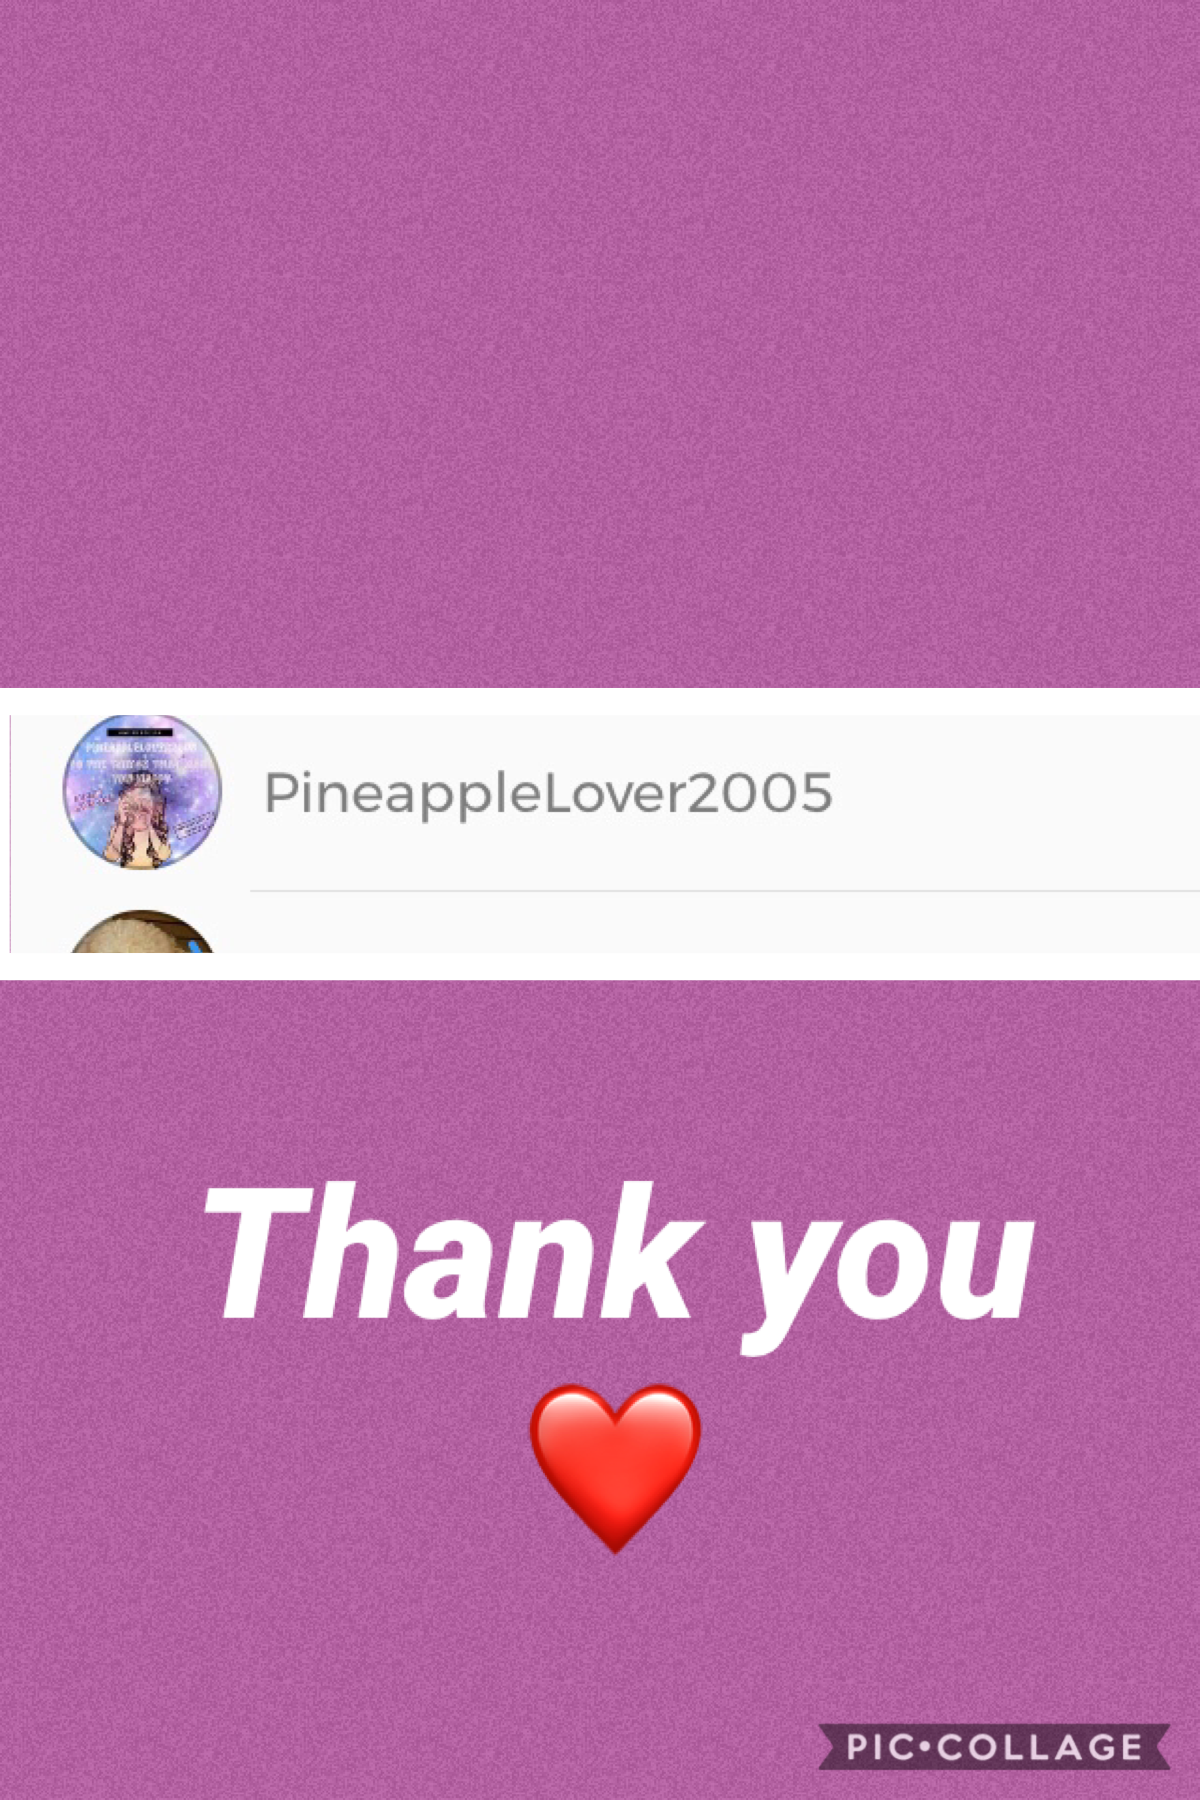 Thank you pineapplelover_2005